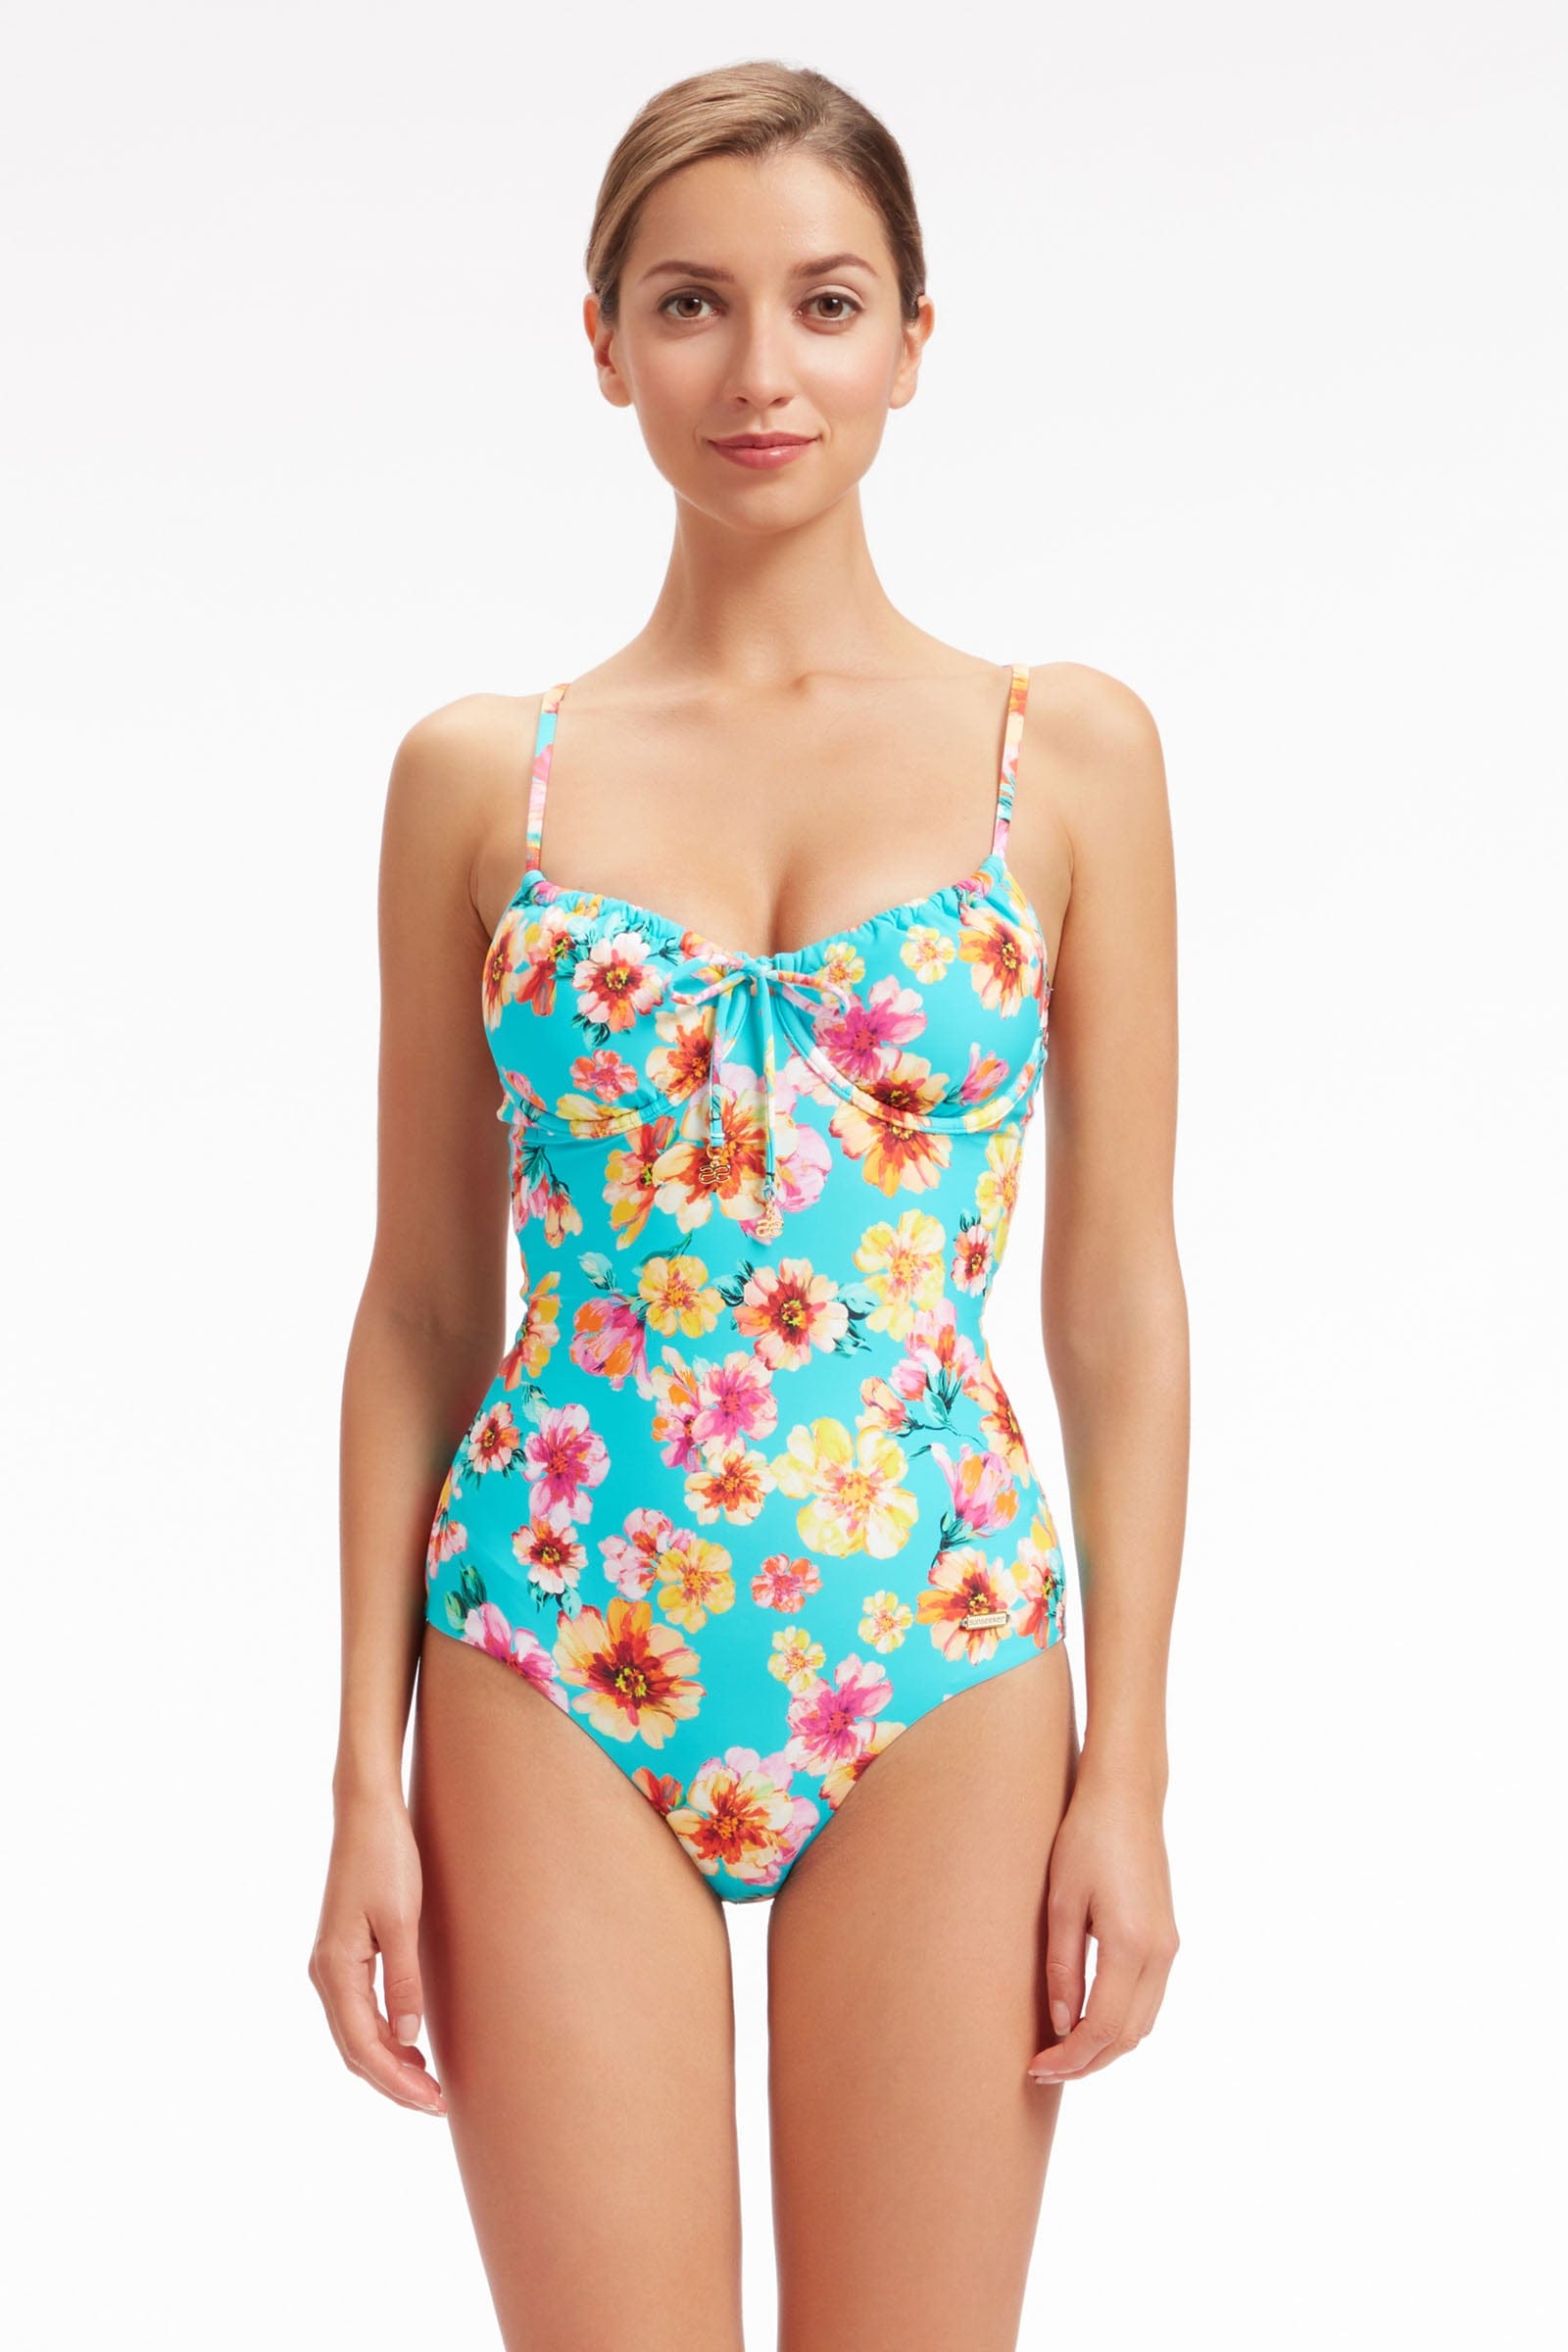 Vibrant Vacation Sky Blue Underwire One piece